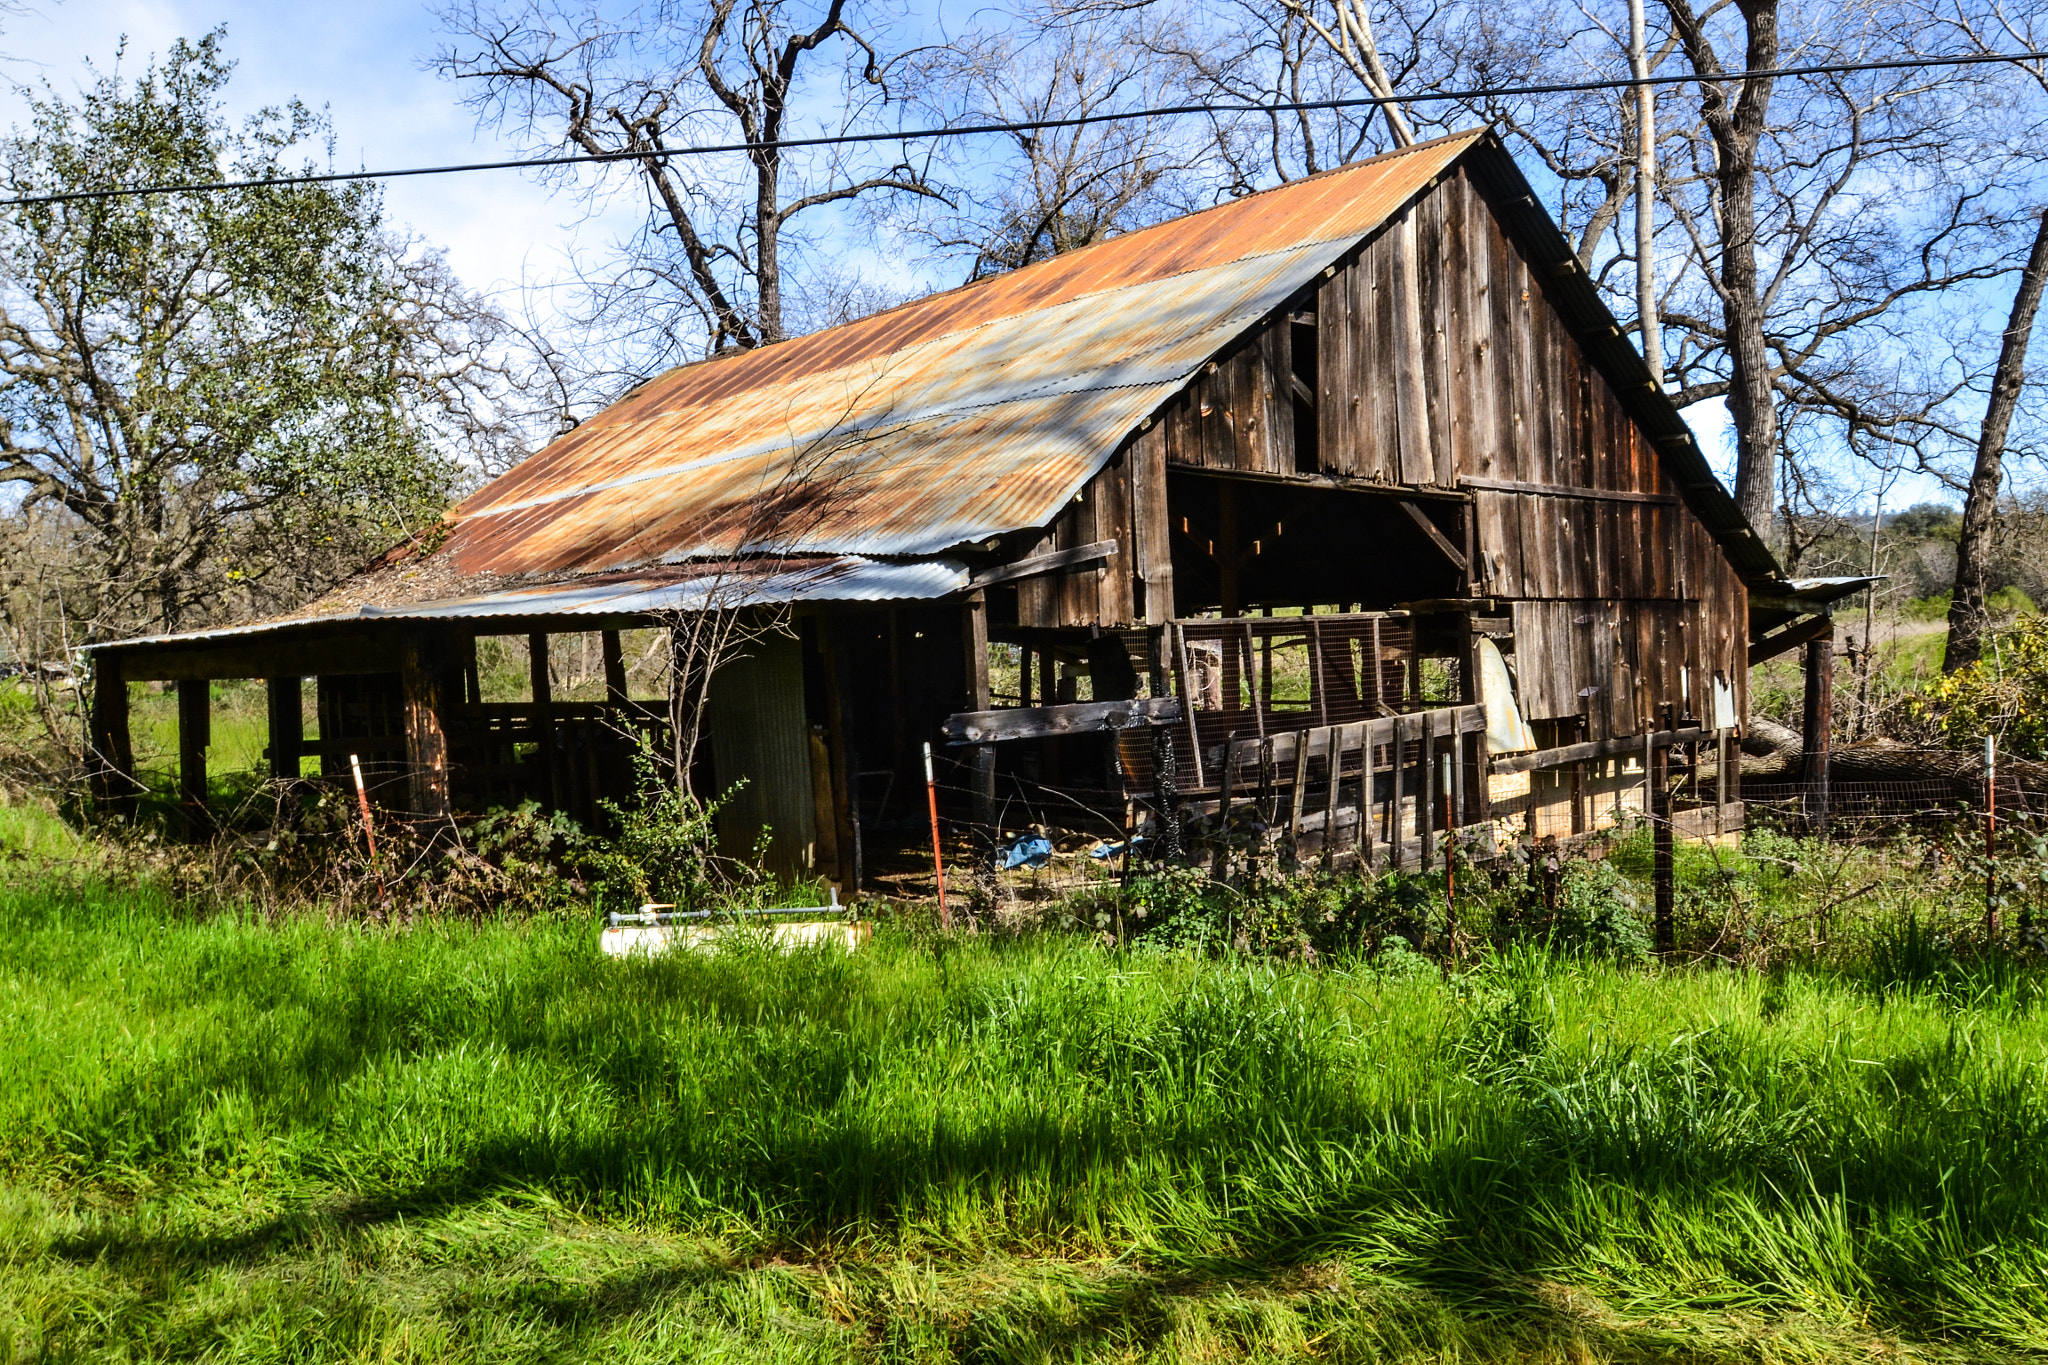 Tamron SP AF 10-24mm F3.5-4.5 Di II LD Aspherical (IF) sample photo. Old barn off the back roads in auburn, ca photography